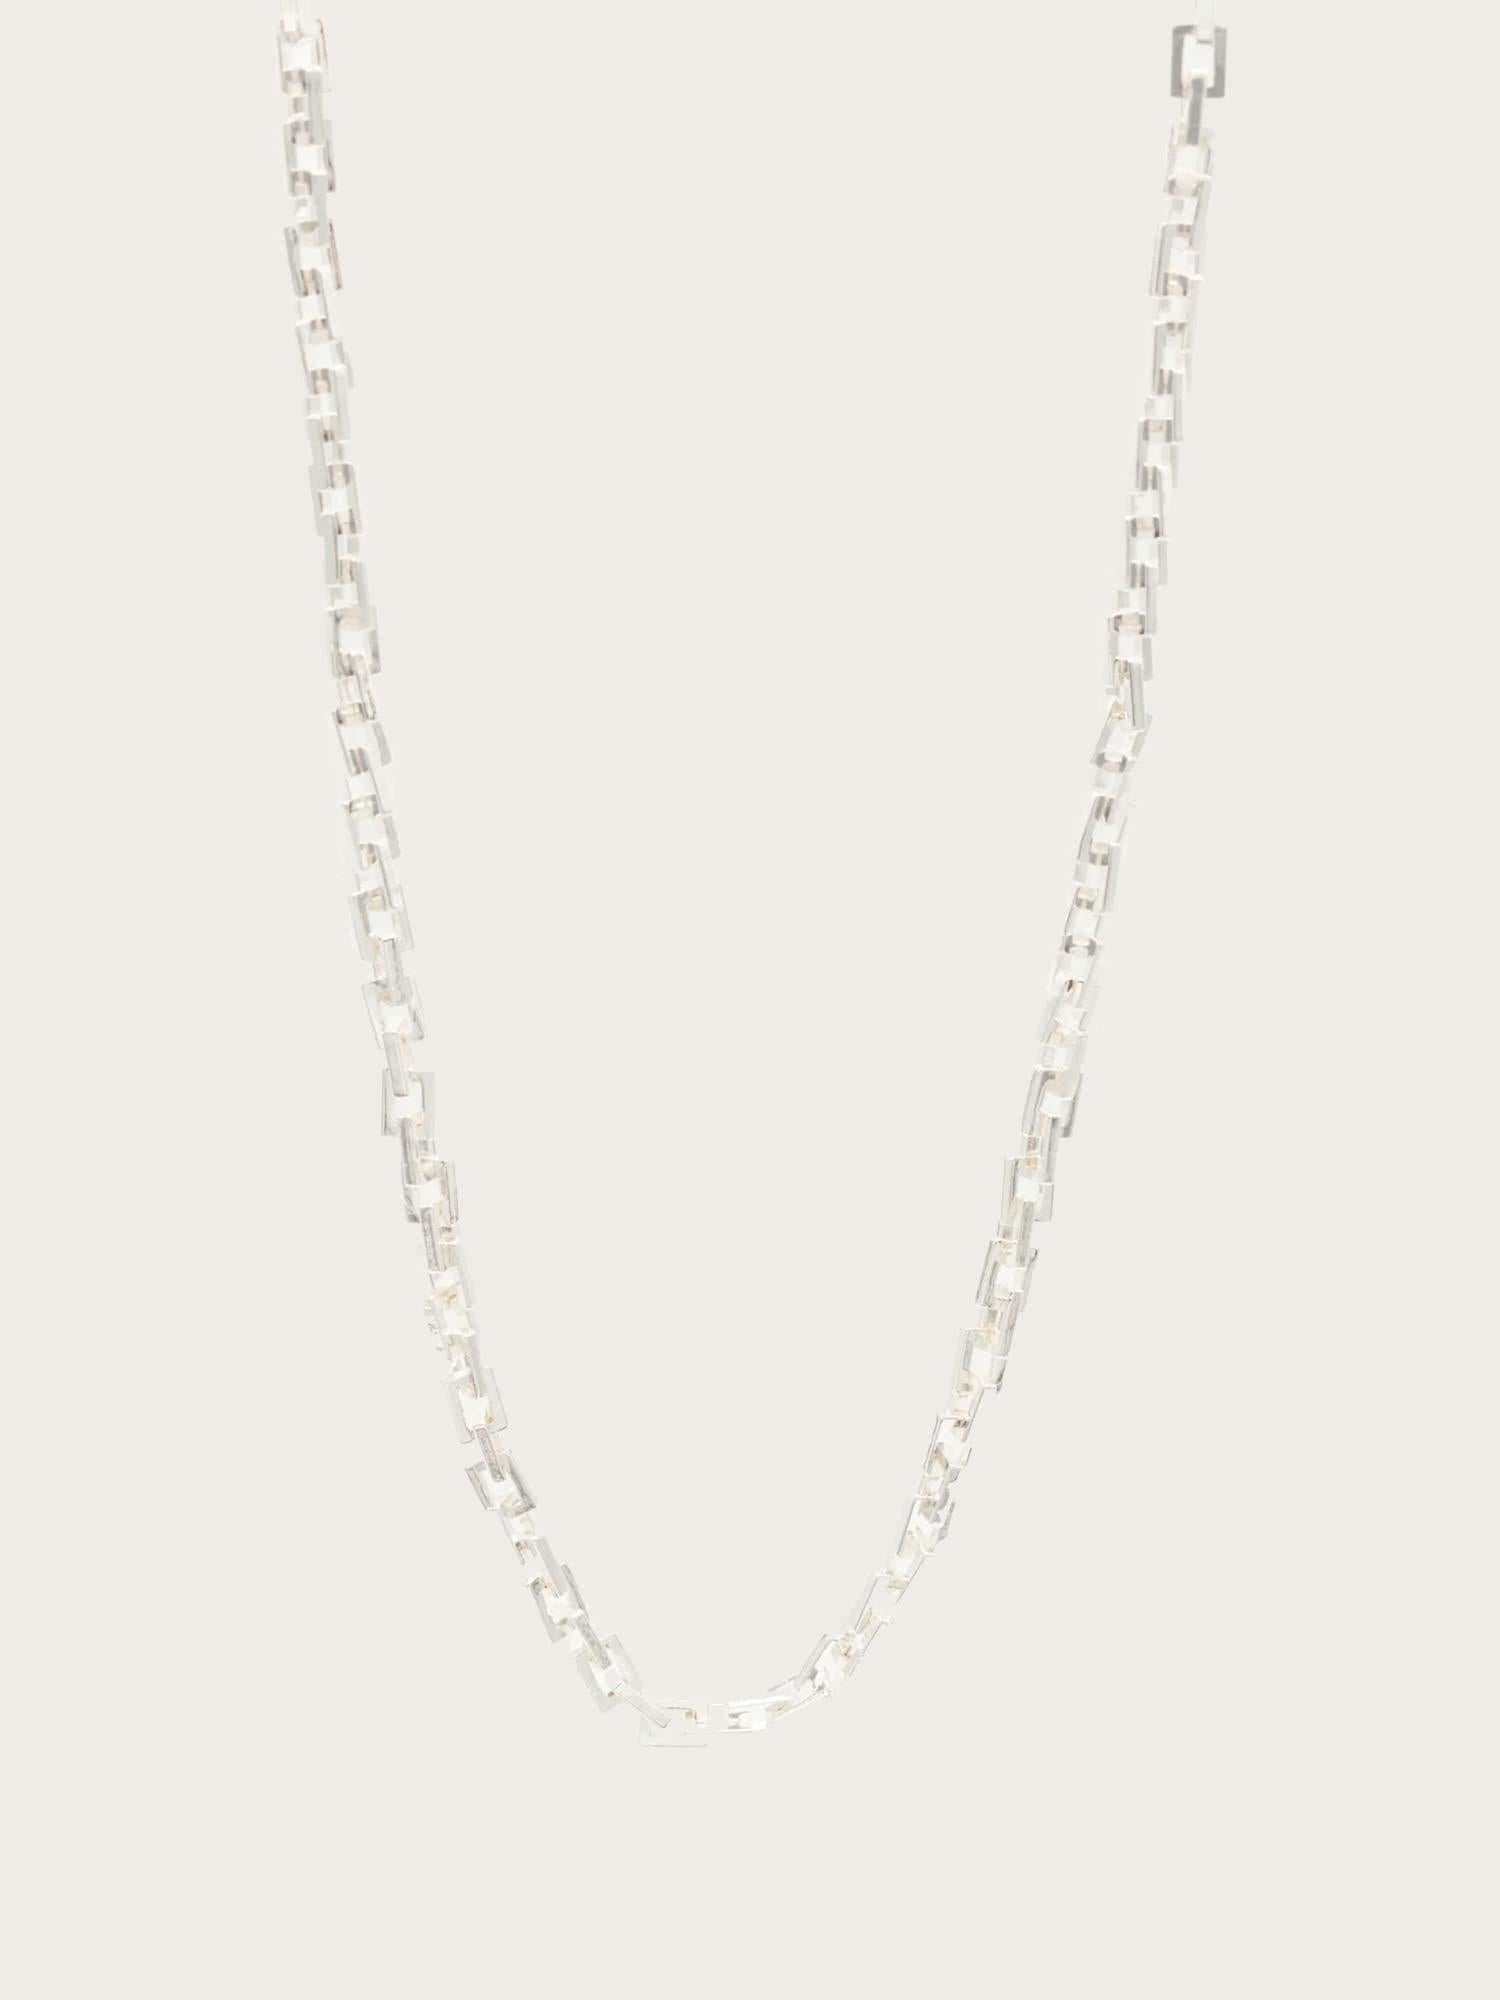 Link Chain - Silver